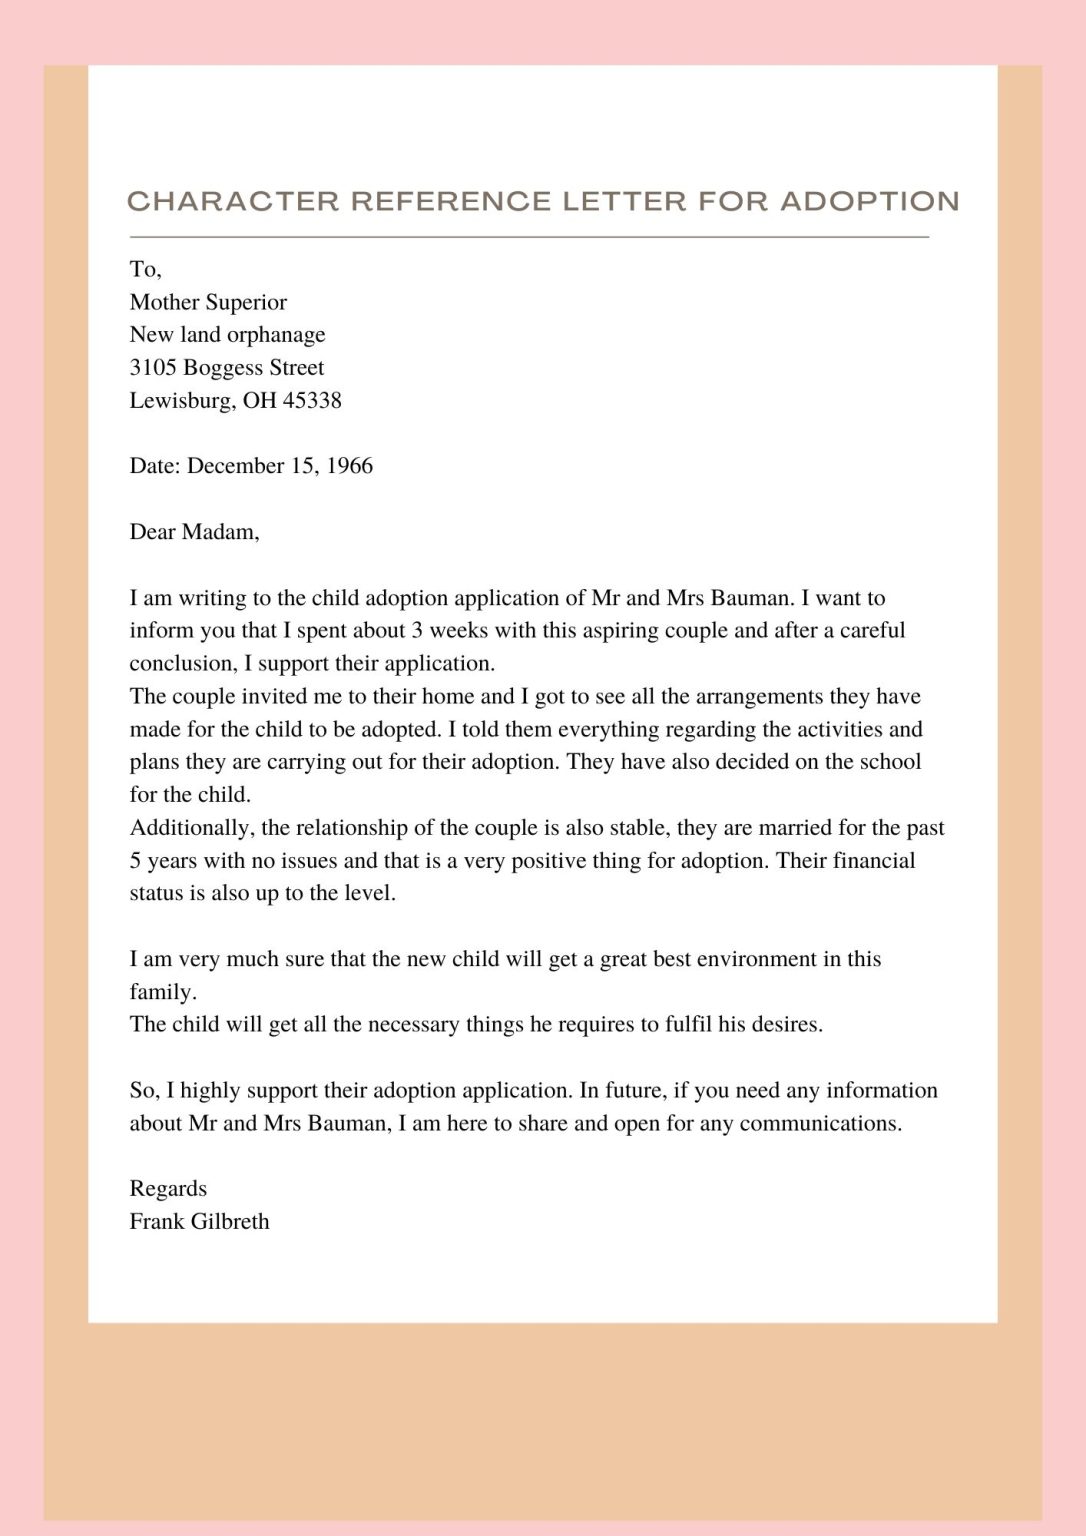 Character Reference Letter For Adoption.pdf 1 1086x1536 